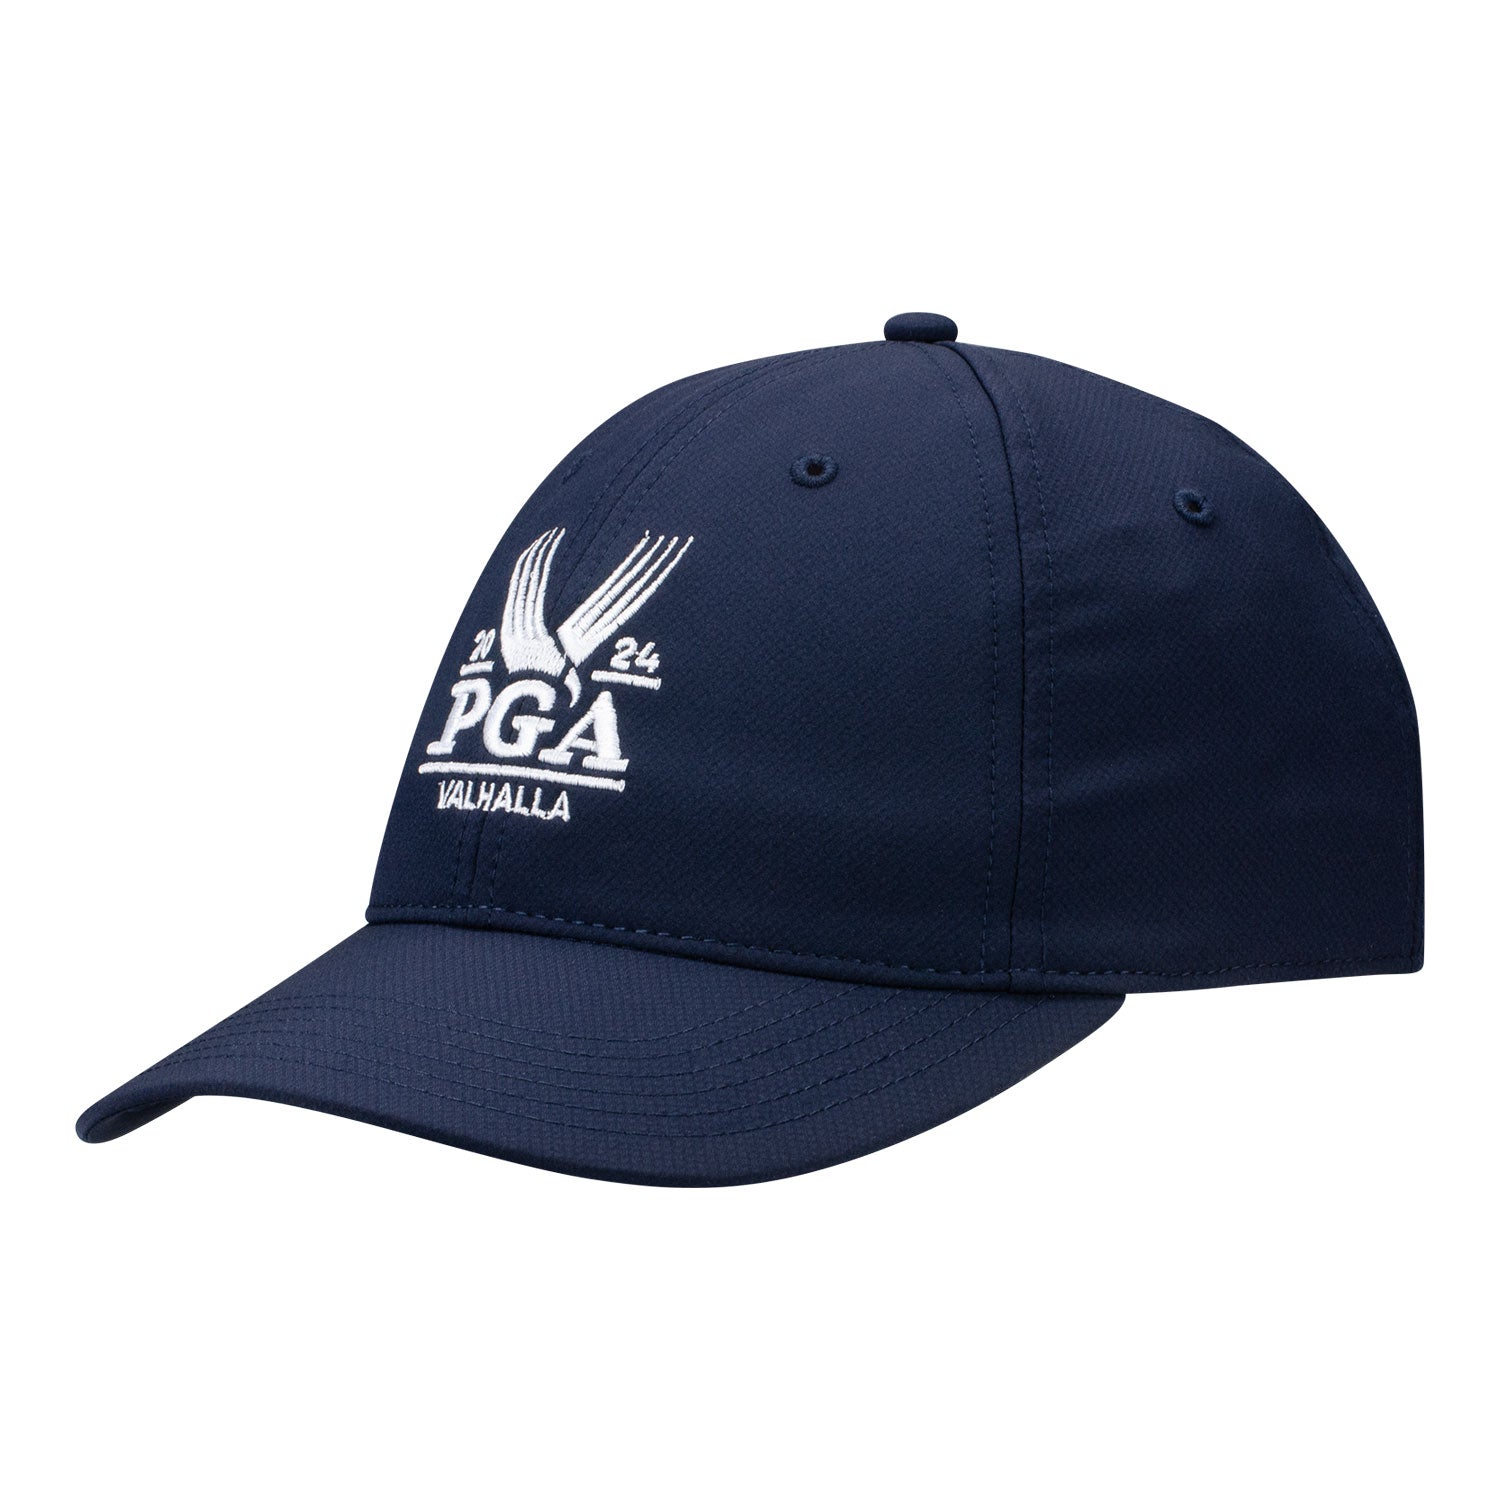 Ahead 2024 Pga Championship Ultimate Fit Unstructured Adjustable Hat in Navy